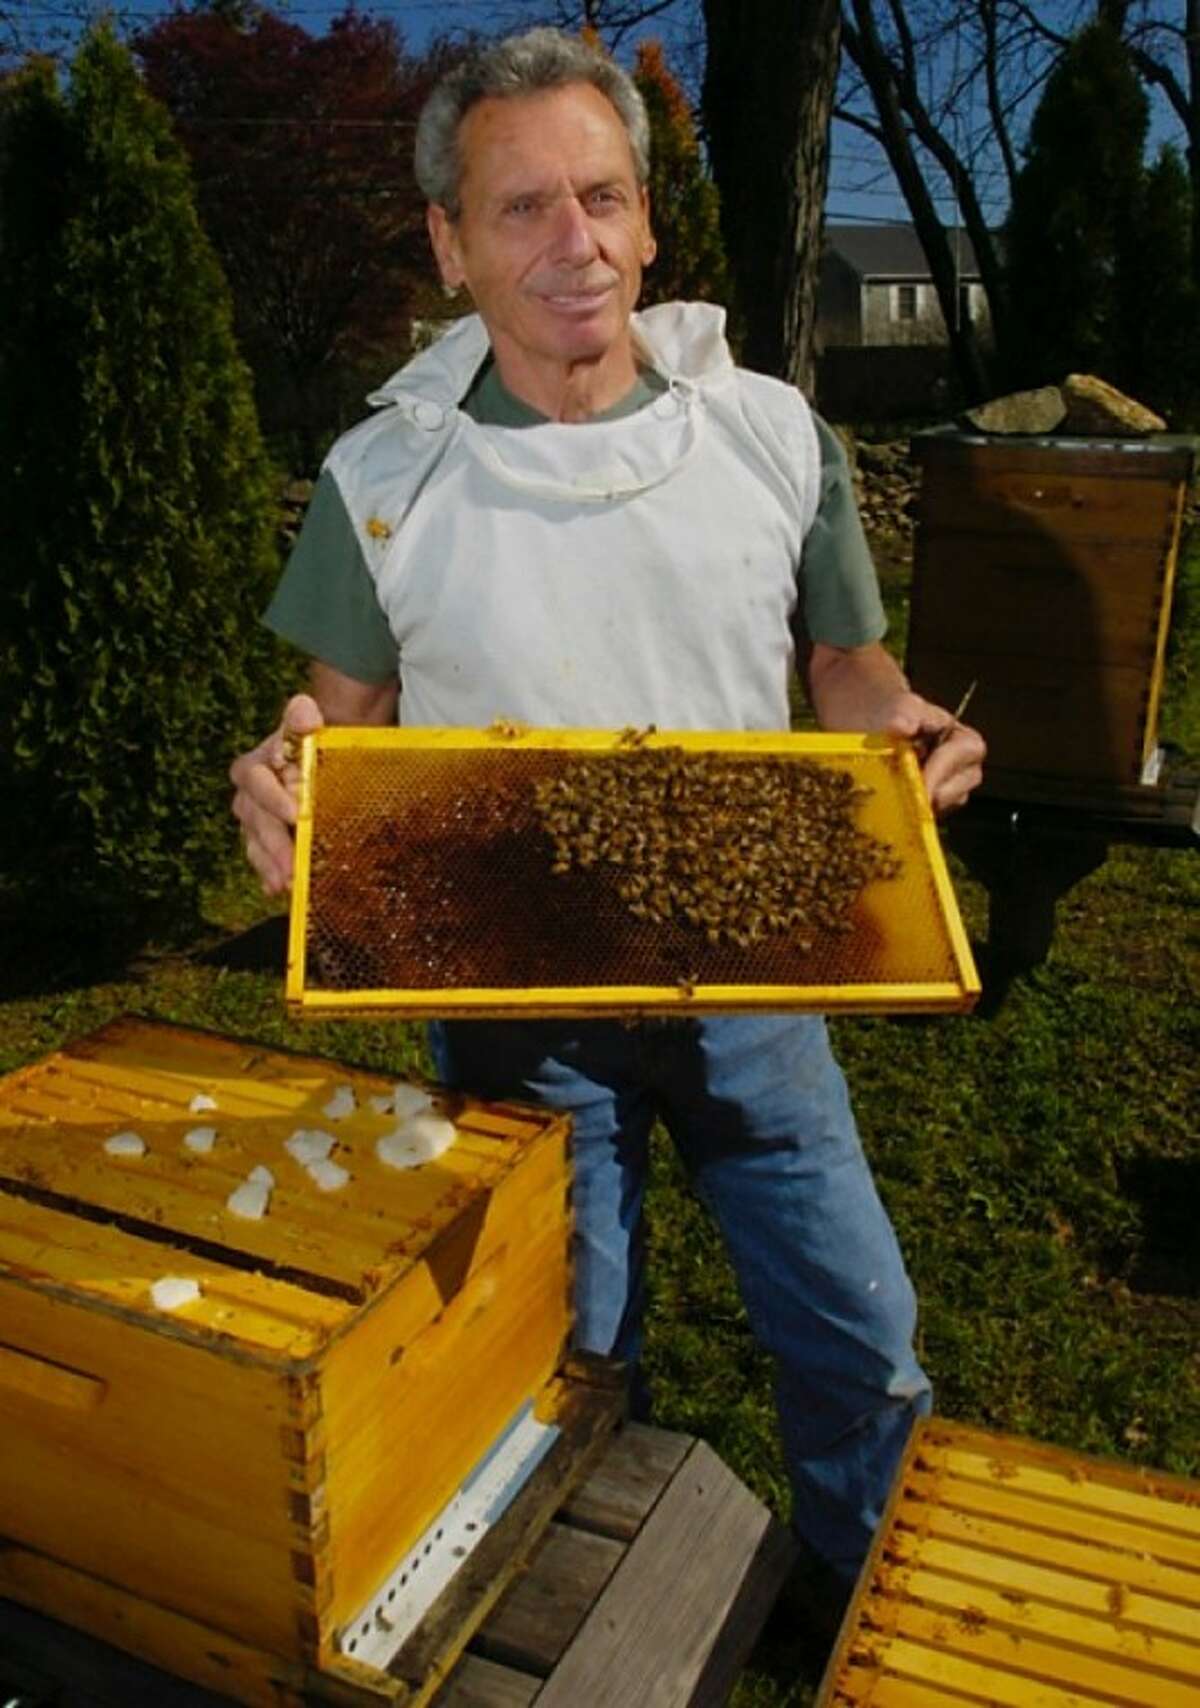 Norm Cote is a hobbyist beekeeper and helps maintain the hives at the Fodor Farm for the City of Norwalk. Hour photo / Erik Trautmann